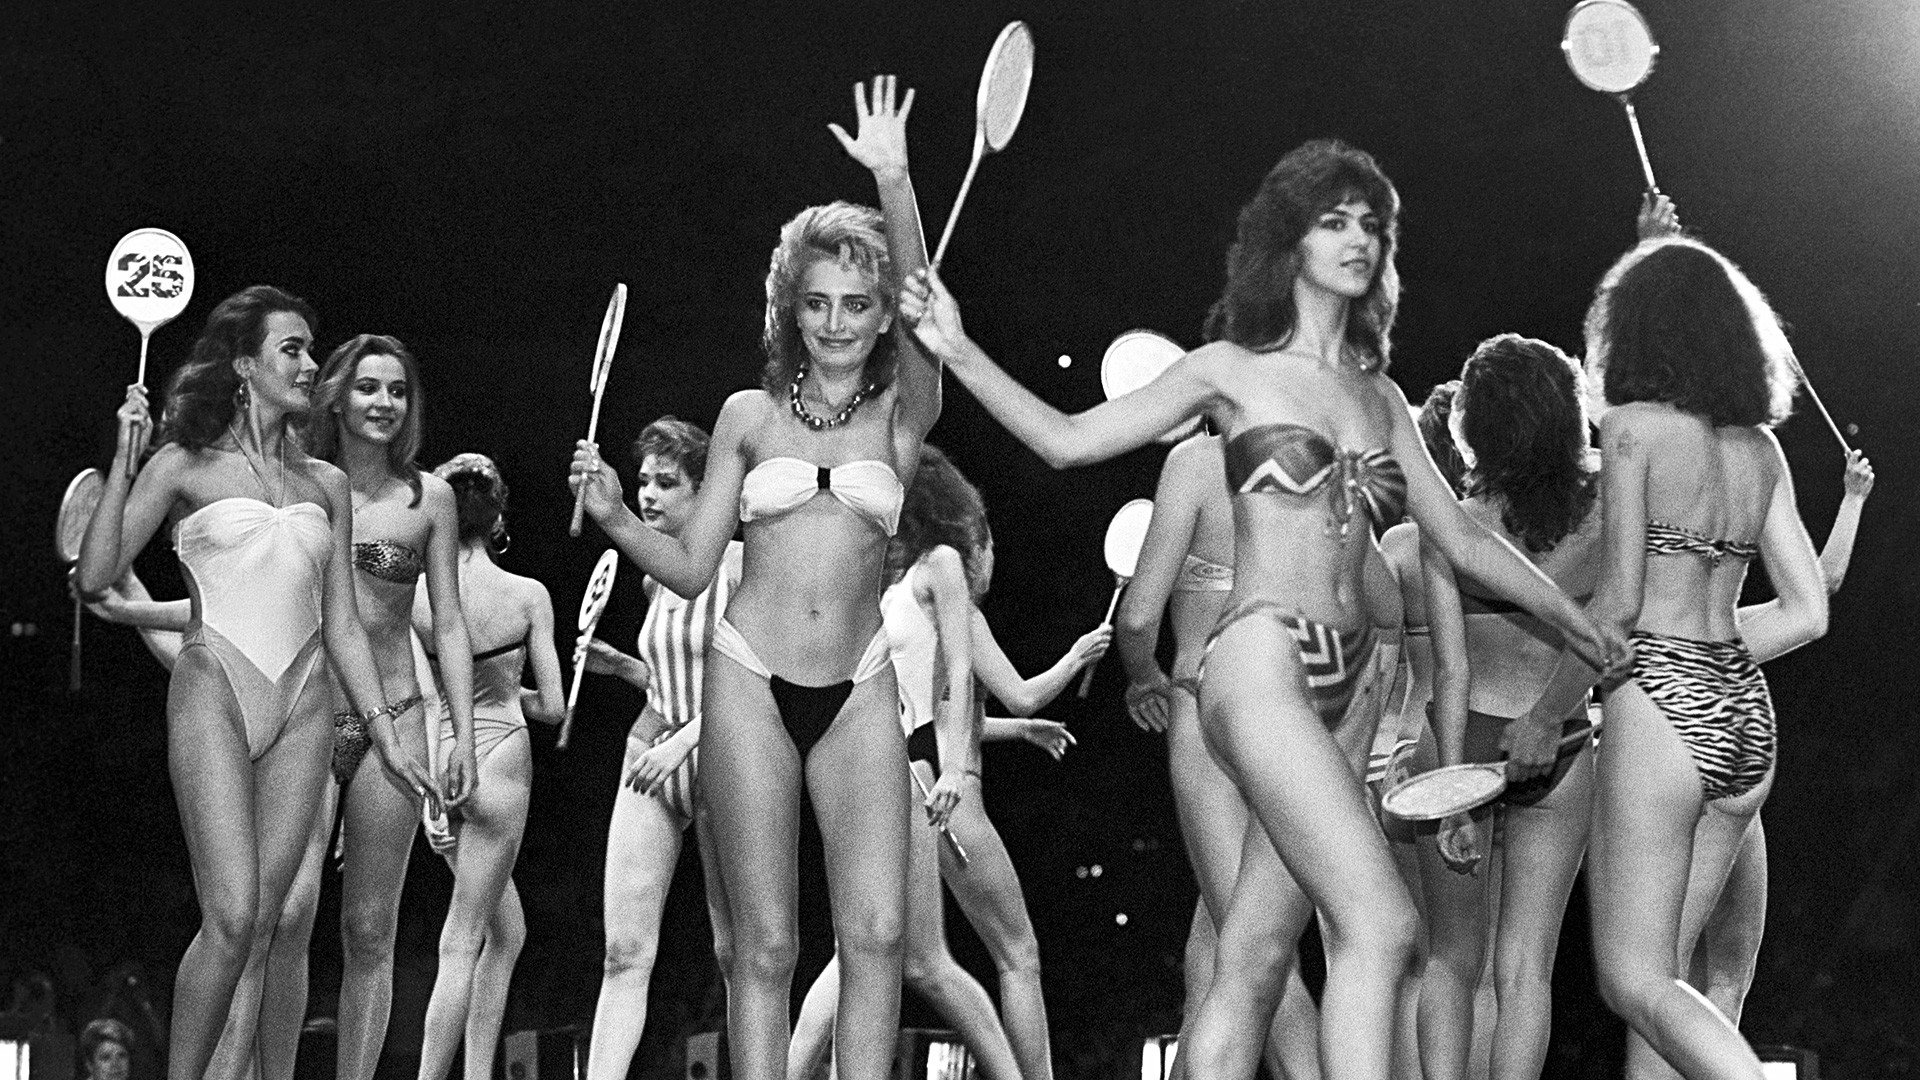 Participants on the runway during swimsuit modeling.